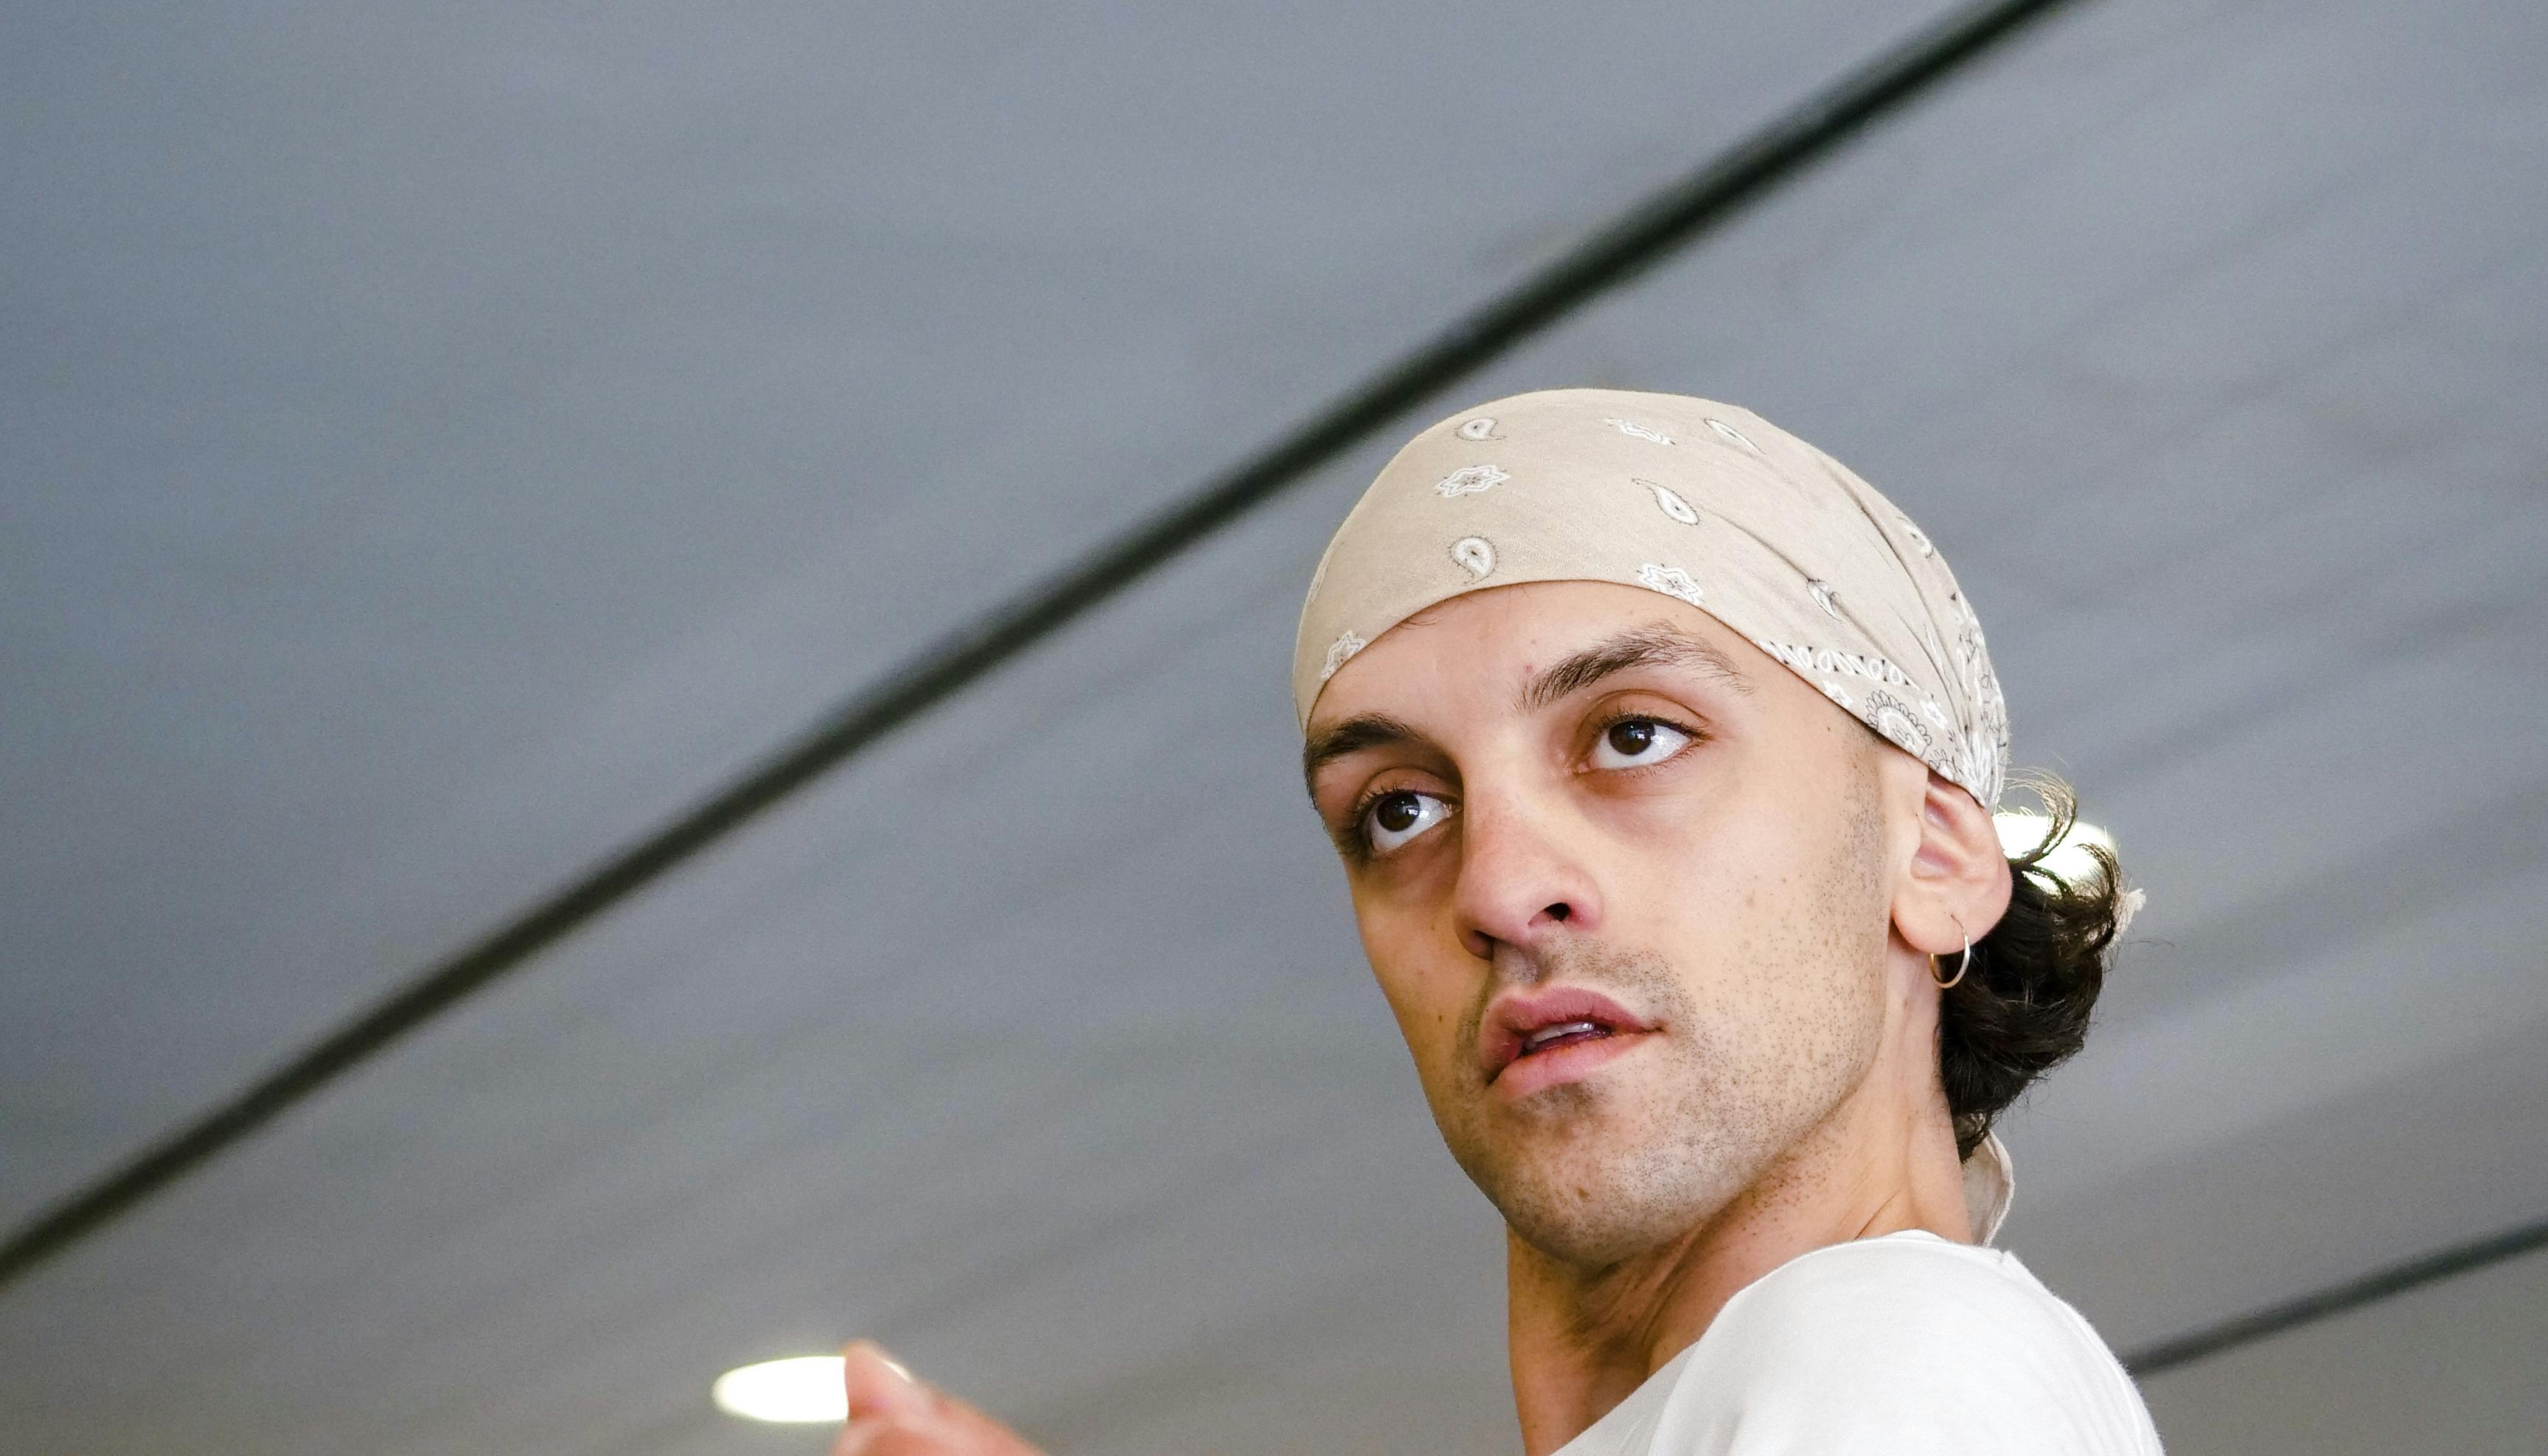 A performer with a beige bandana looks over his forearm 